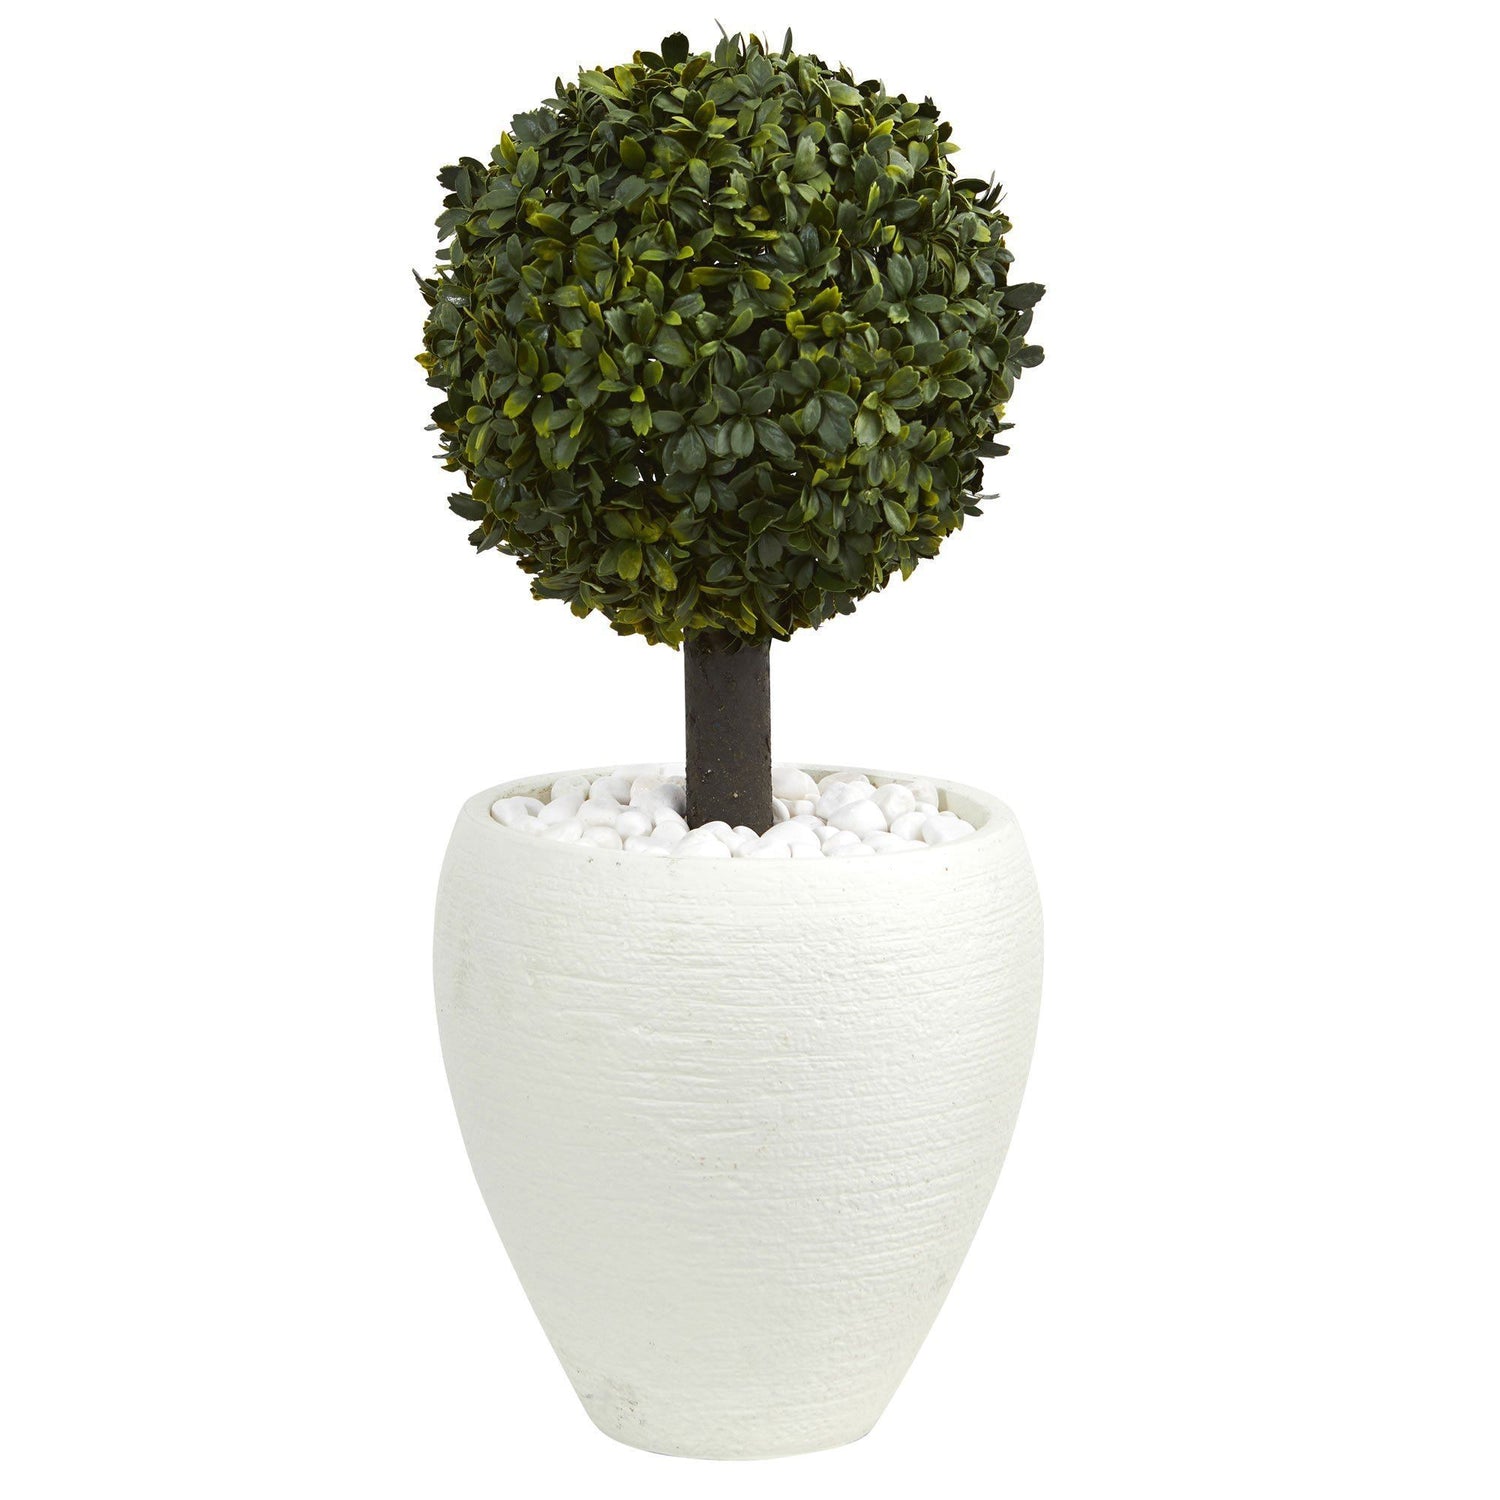 26” Boxwood Topiary Artificial Tree in White Oval Planter (Indoor/Outdoor)